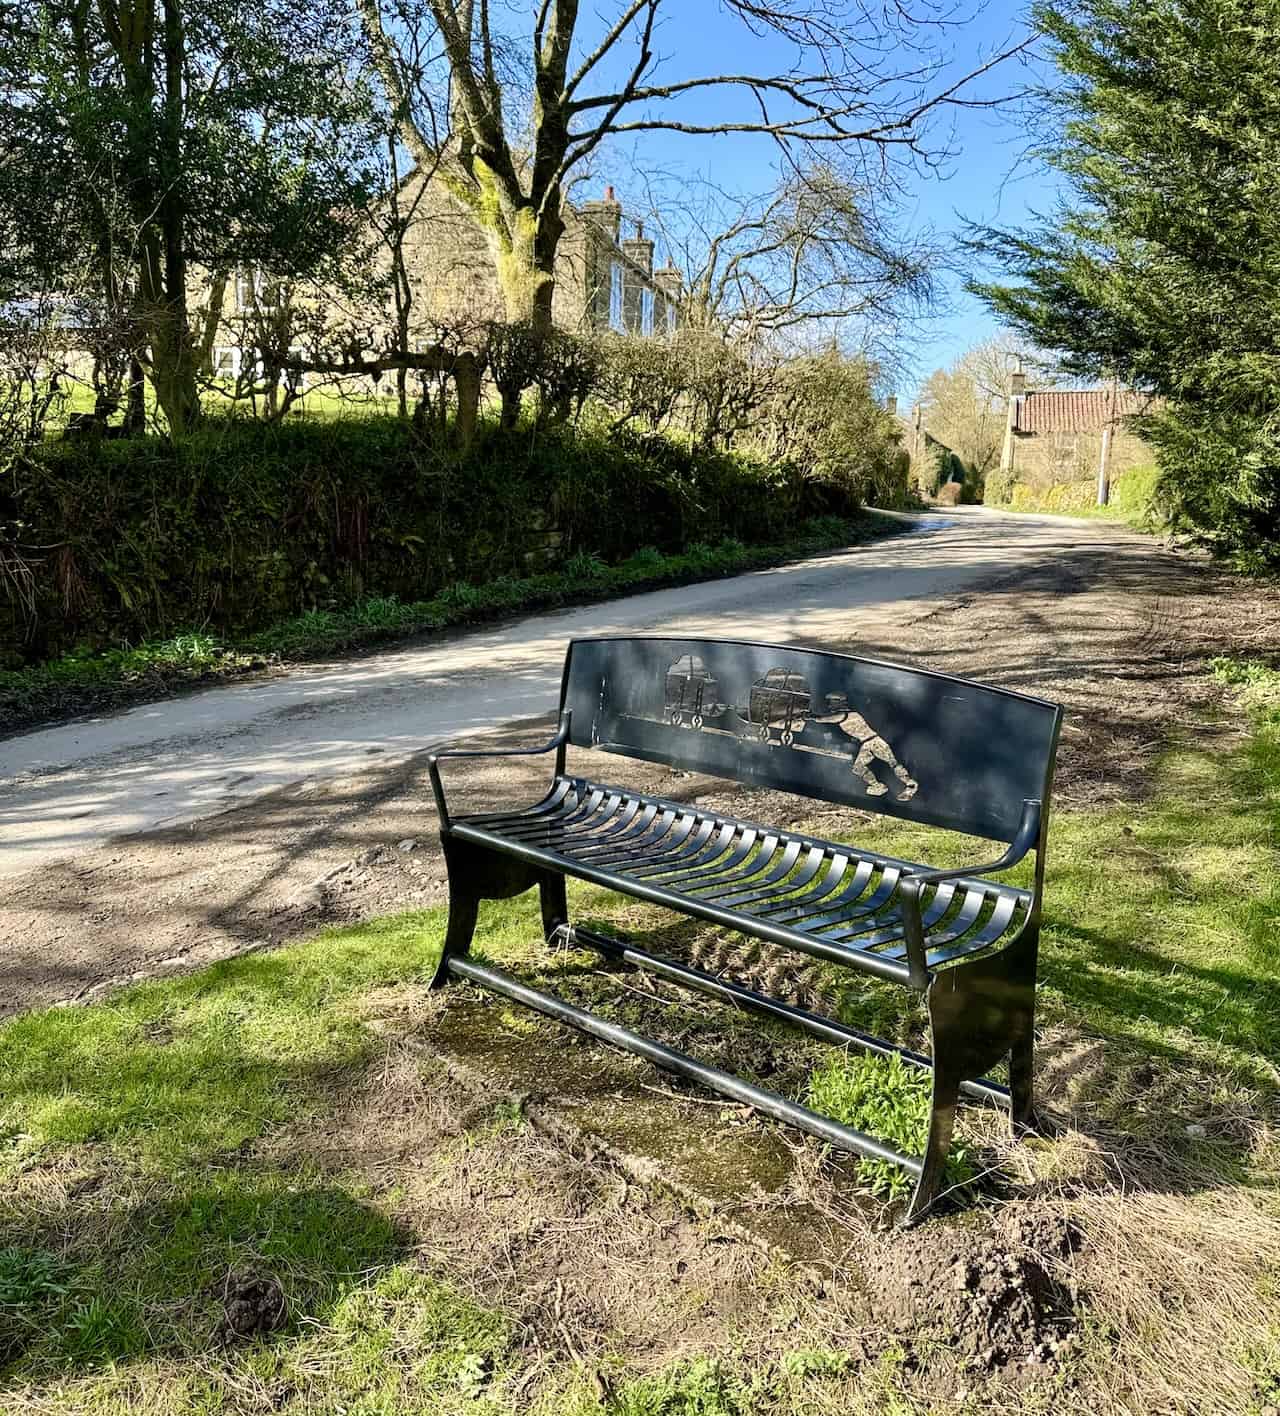 In Thorgill, an artistic iron bench depicts a worker pushing railway carts laden with ironstone, blending historical significance with local craftsmanship.